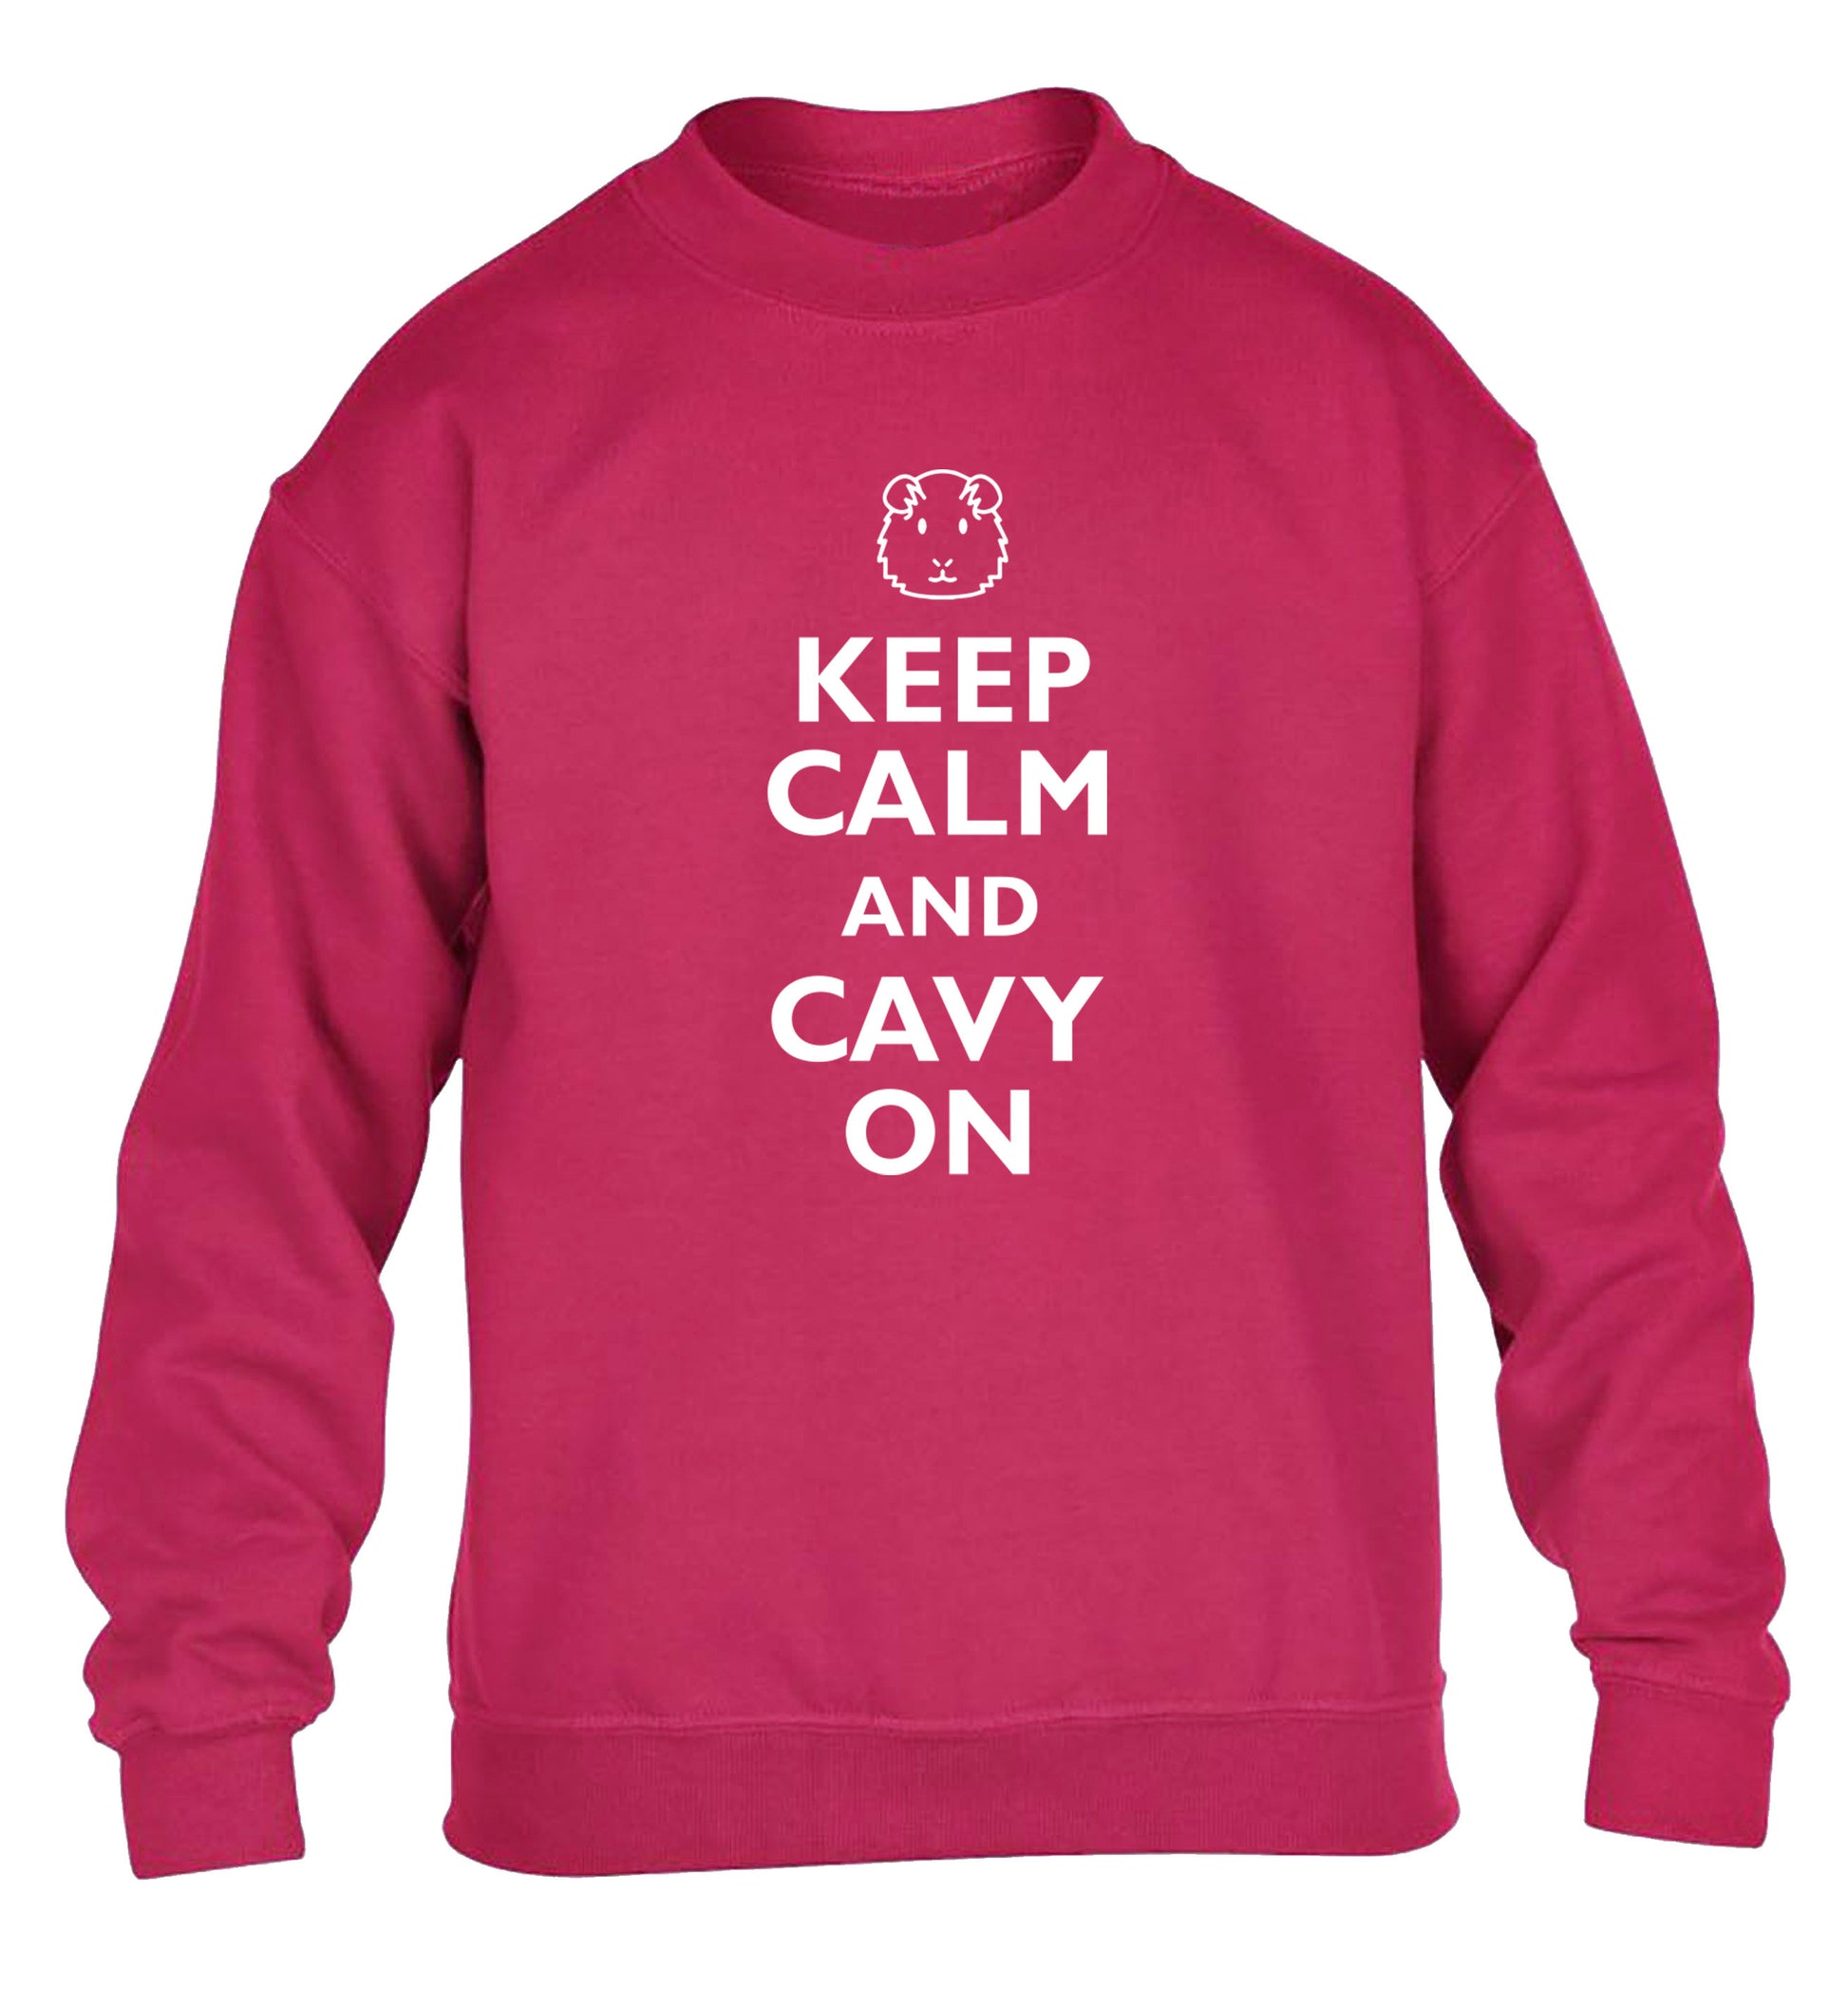 Keep calm and cavvy on children's pink  sweater 12-14 Years